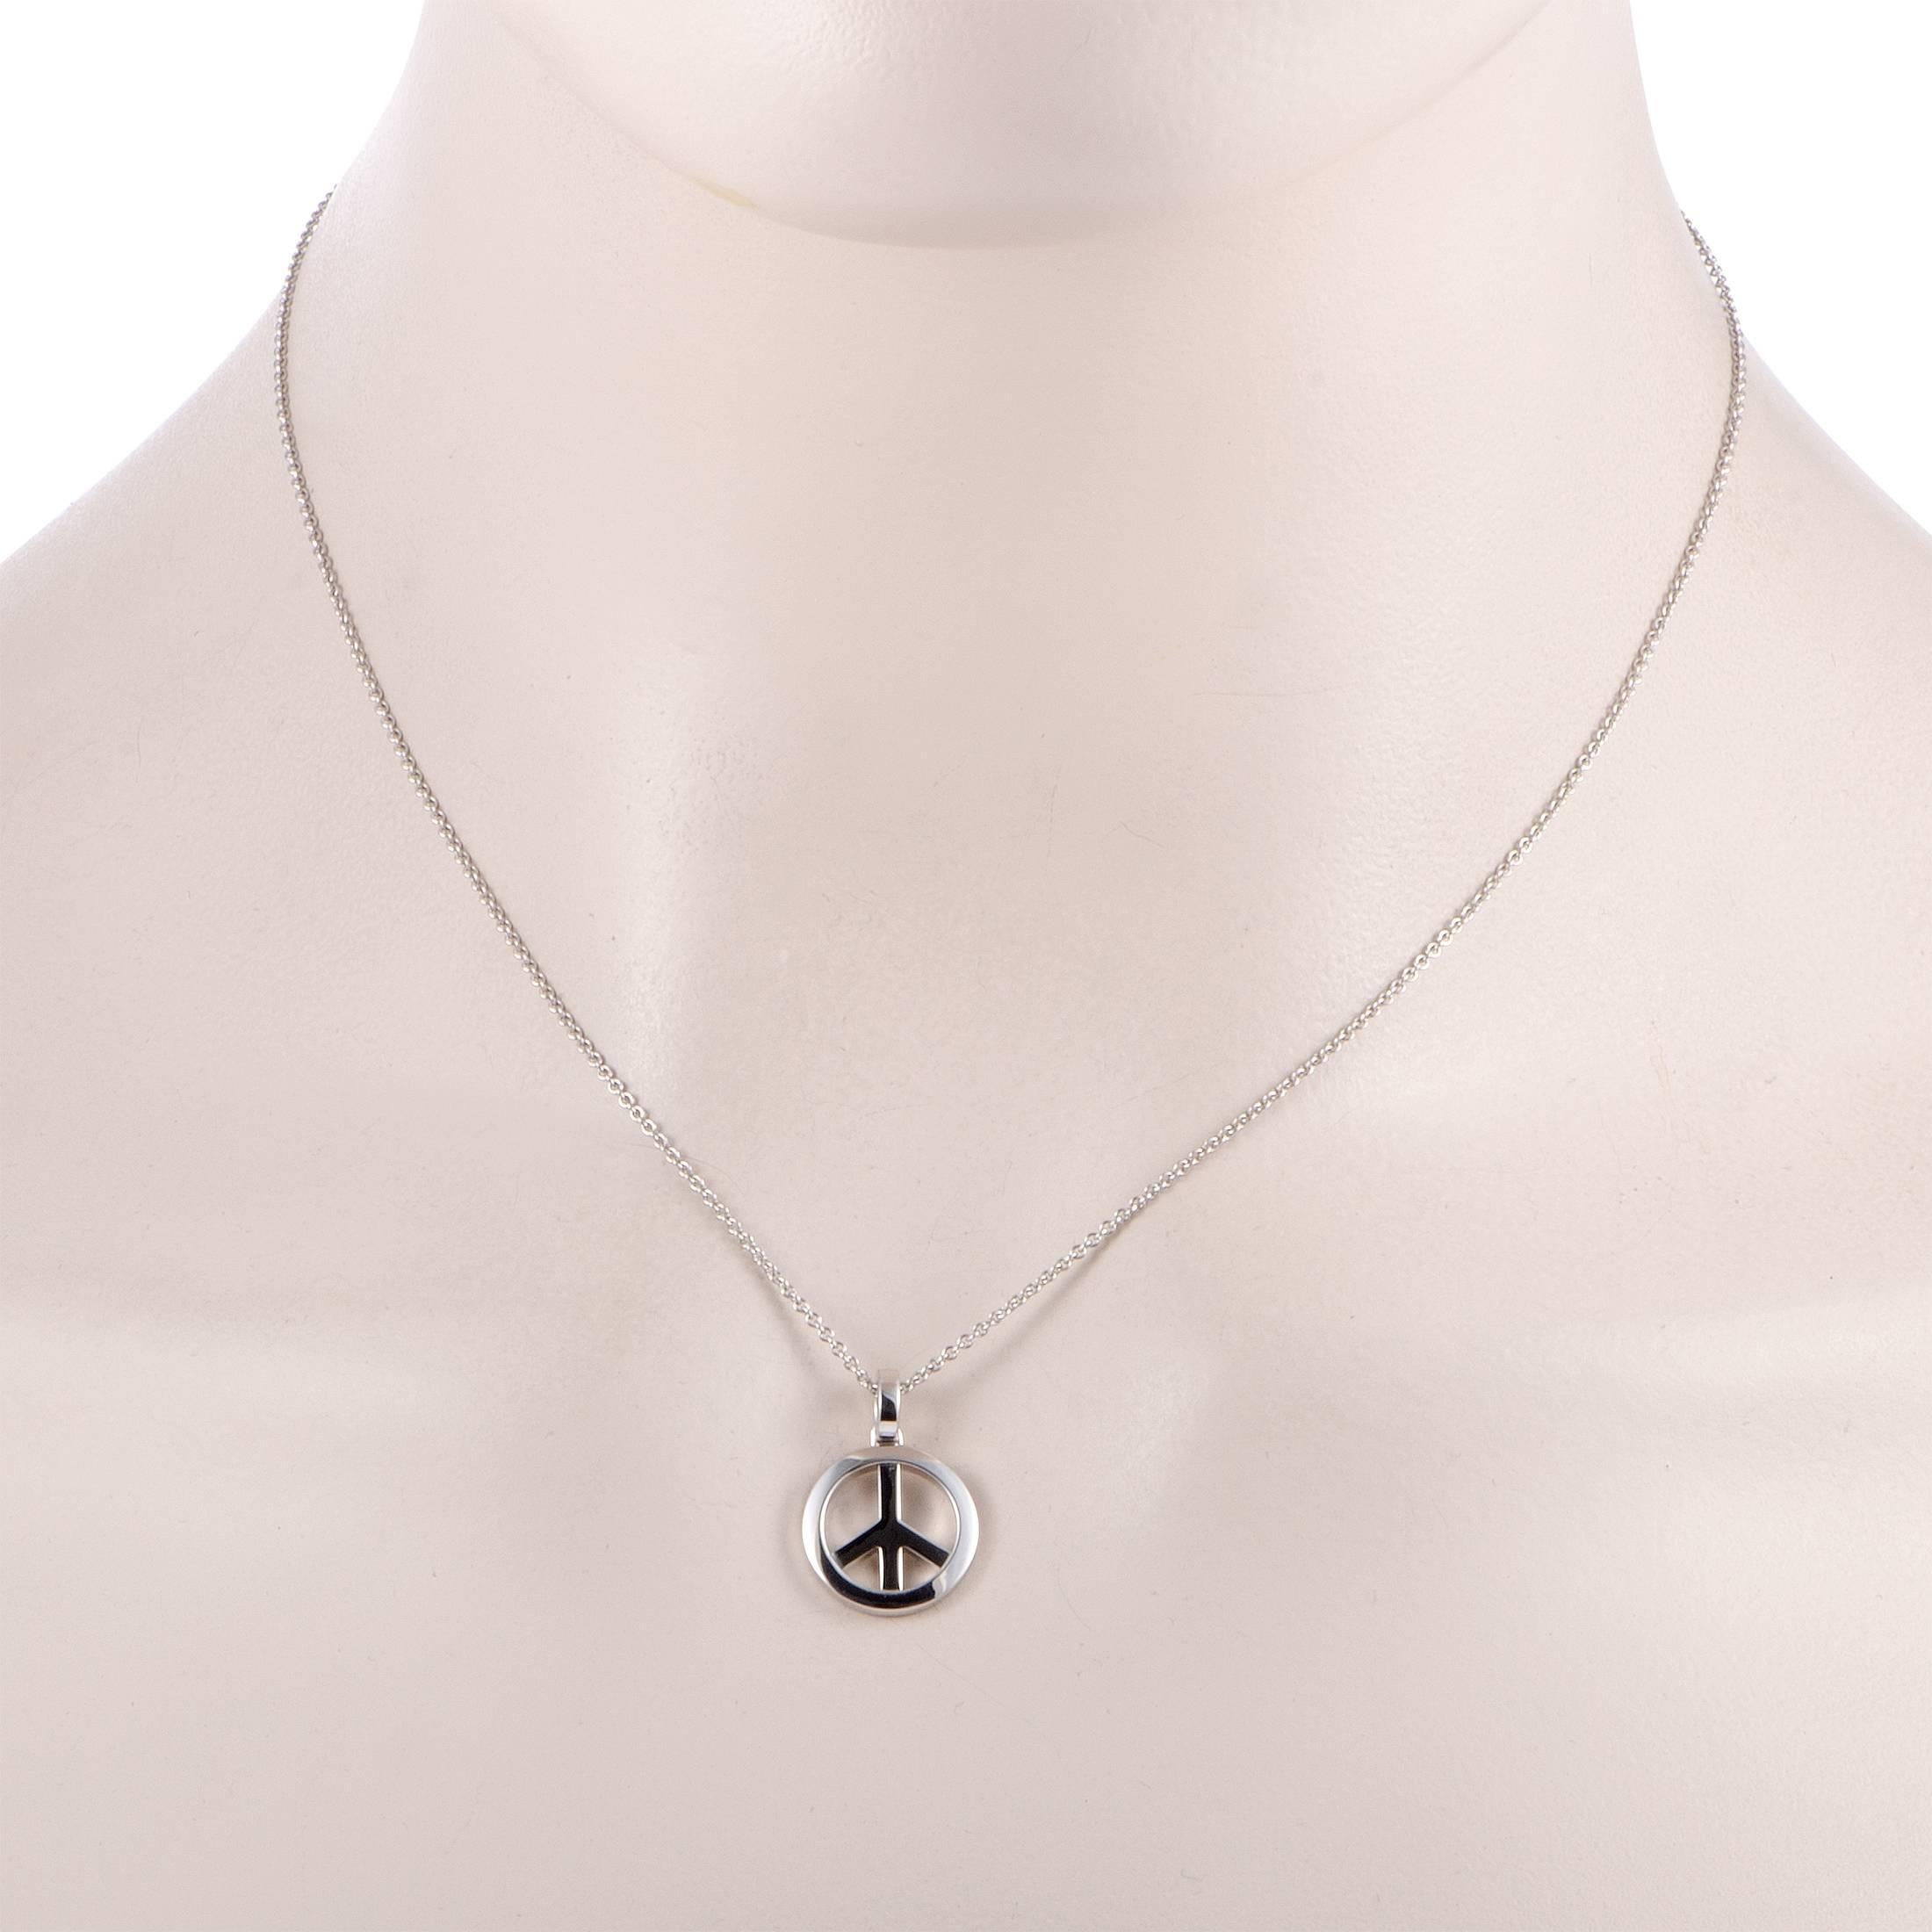 Accentuate your style in a captivatingly bold manner with this exquisite necklace that depicts one of the most recognized symbols. The necklace is presented by Chopard and it is beautifully crafted from elegantly gleaming 18K white gold. The